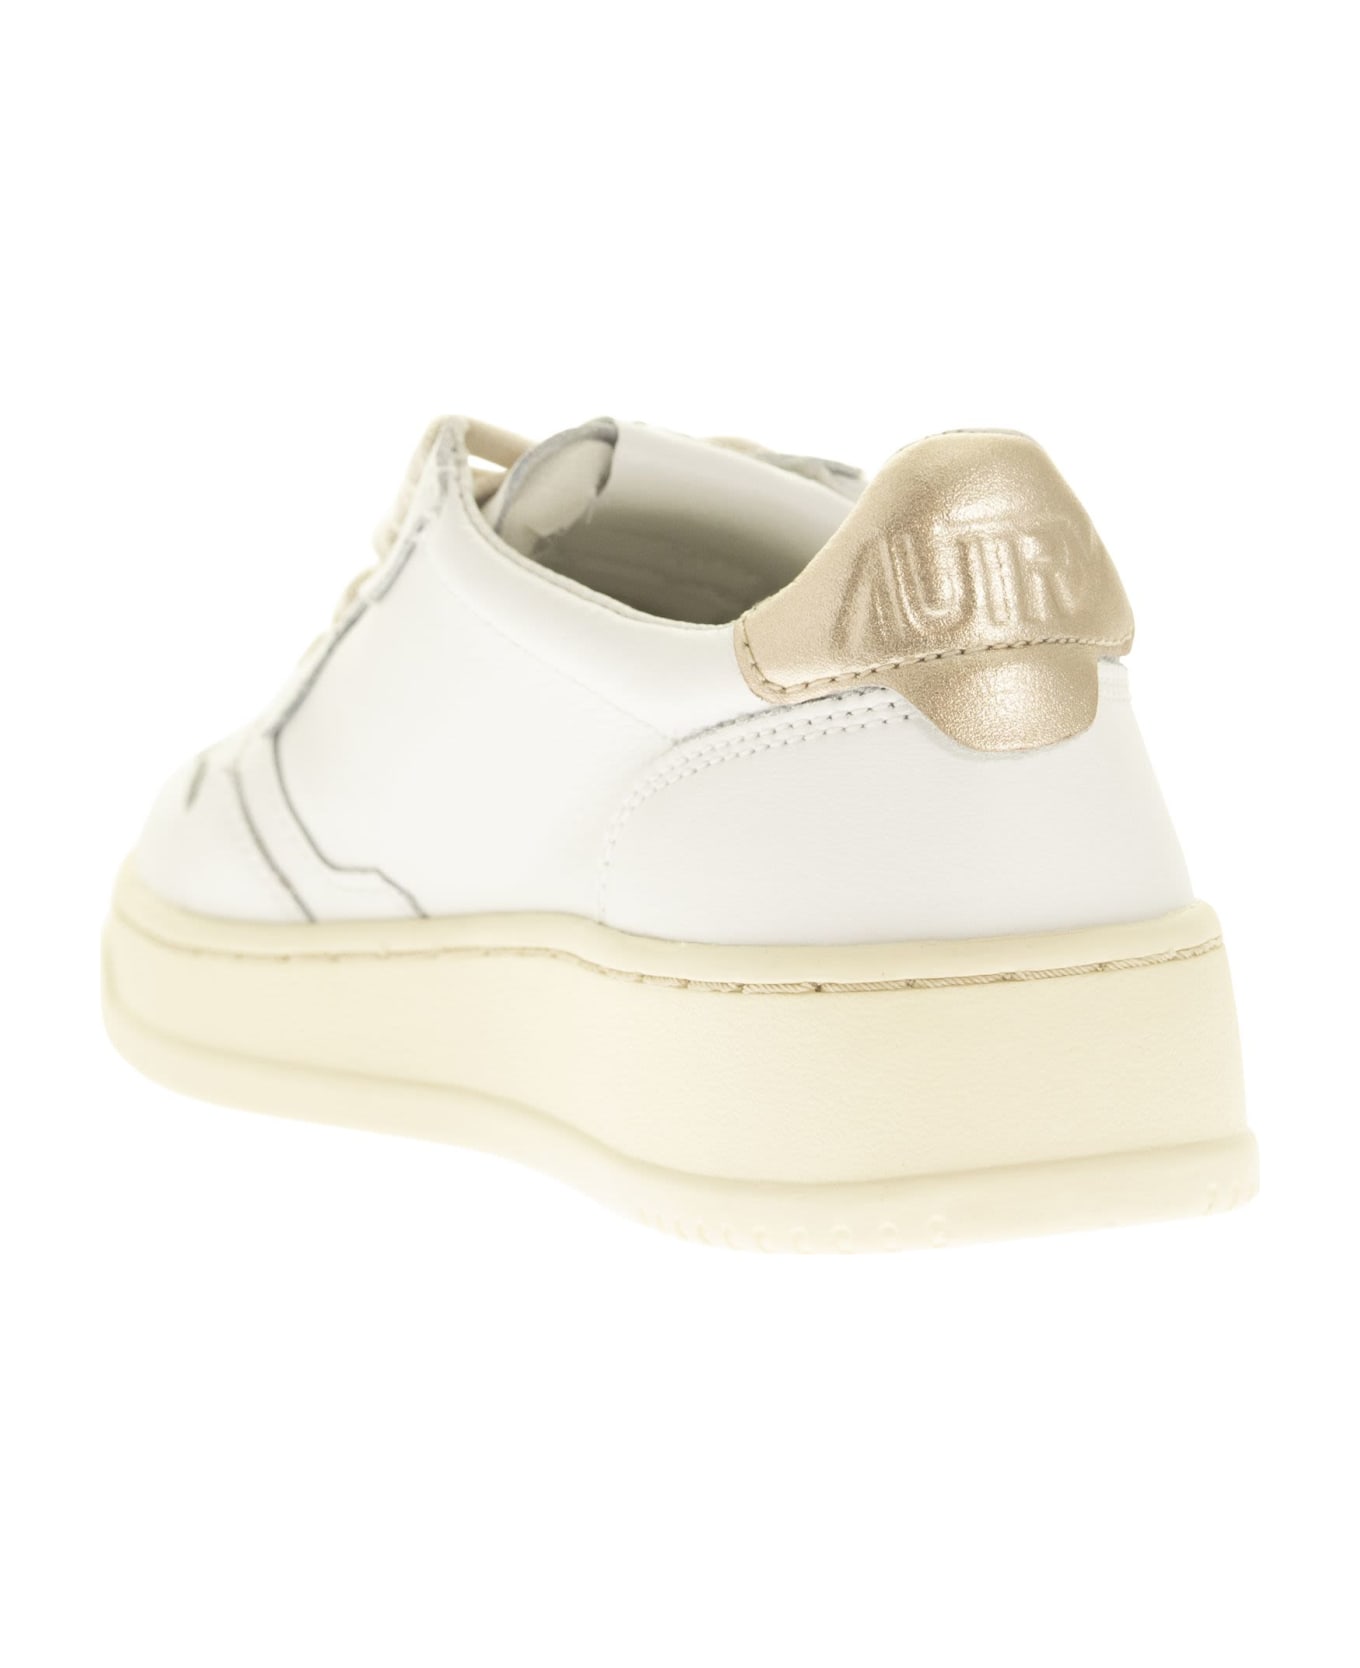 Autry Medalist Low Sneakers - White/Gold スニーカー